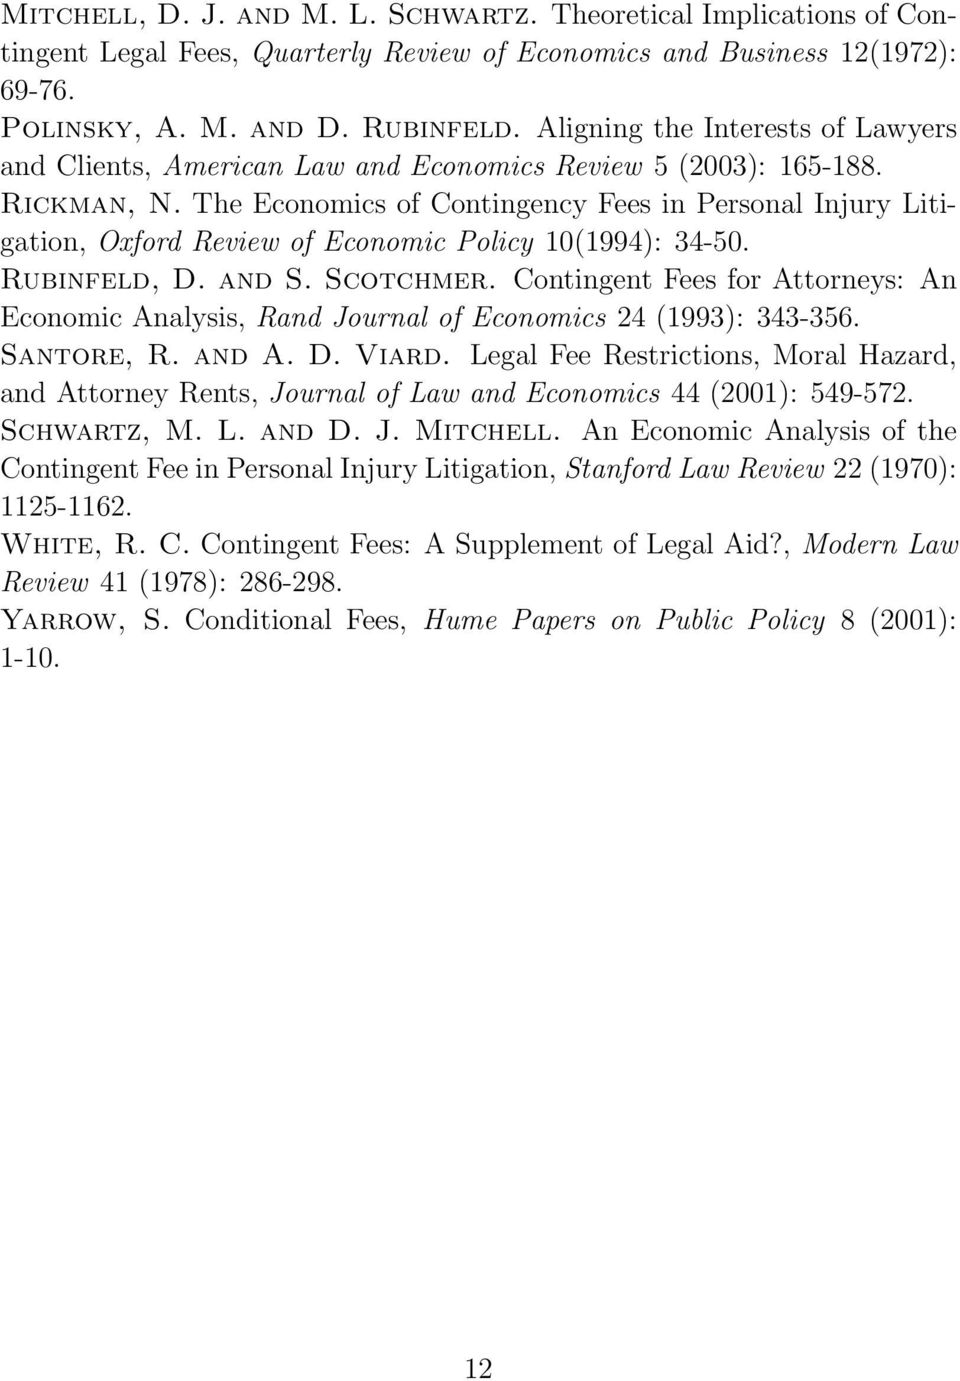 The Economics of Contingency Fees in Personal Injury Litigation, Oxford Review of Economic Policy 10(1994): 34-50. Rubinfeld, D. and S. Scotchmer.